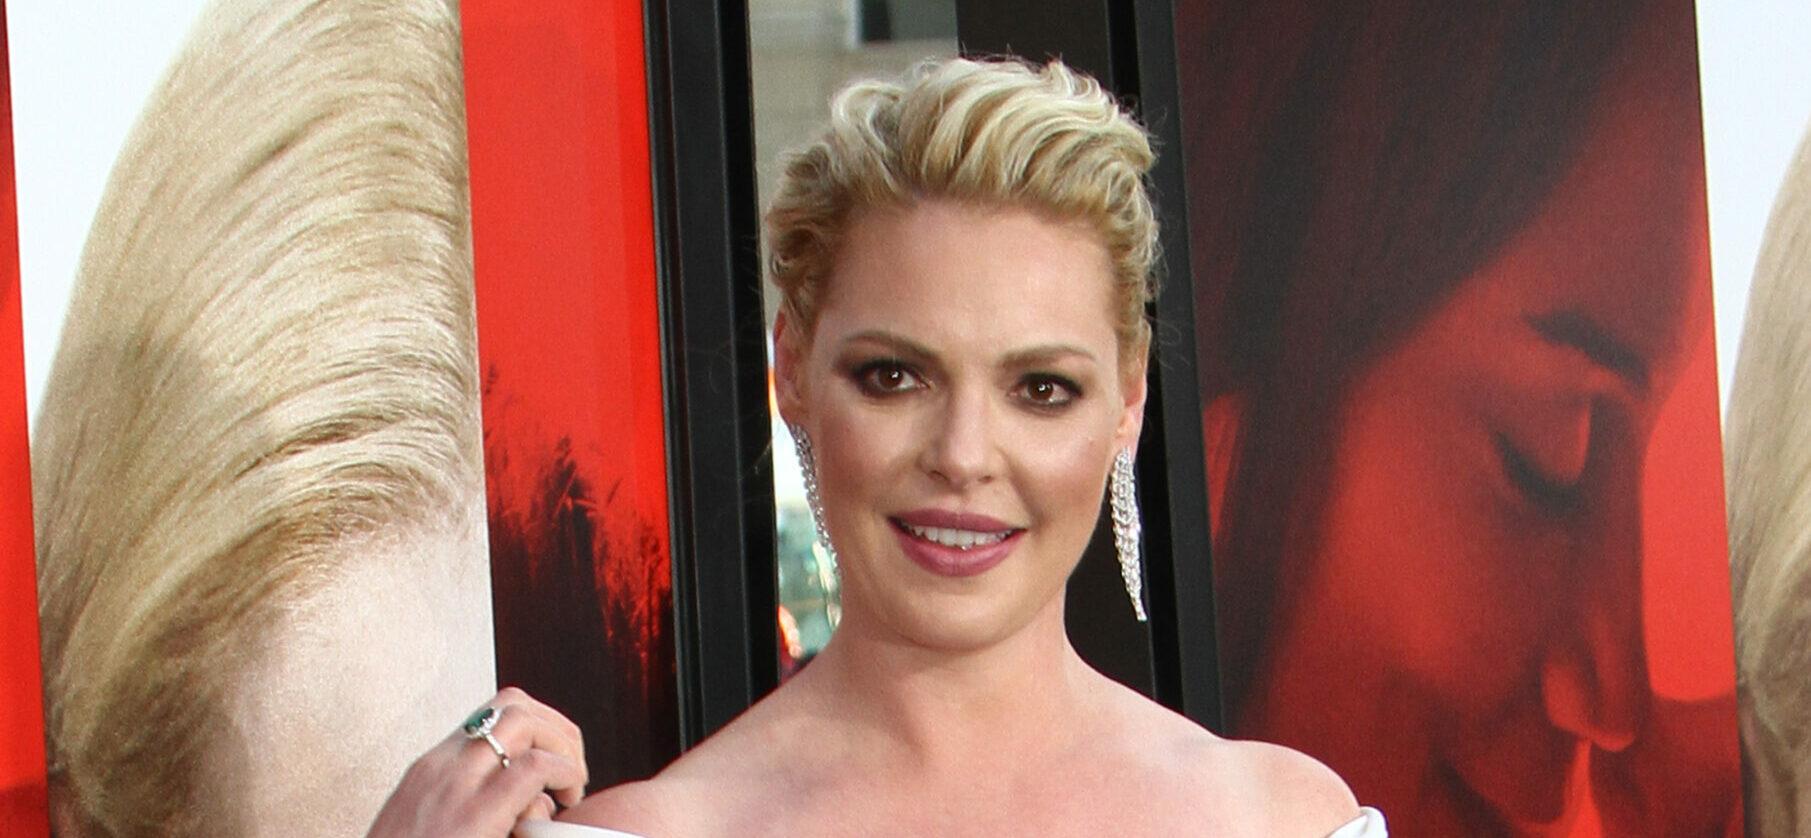 Katherine Heigl Shares The Lessons She Learned After ‘Grey’s Anatomy’ Backlash